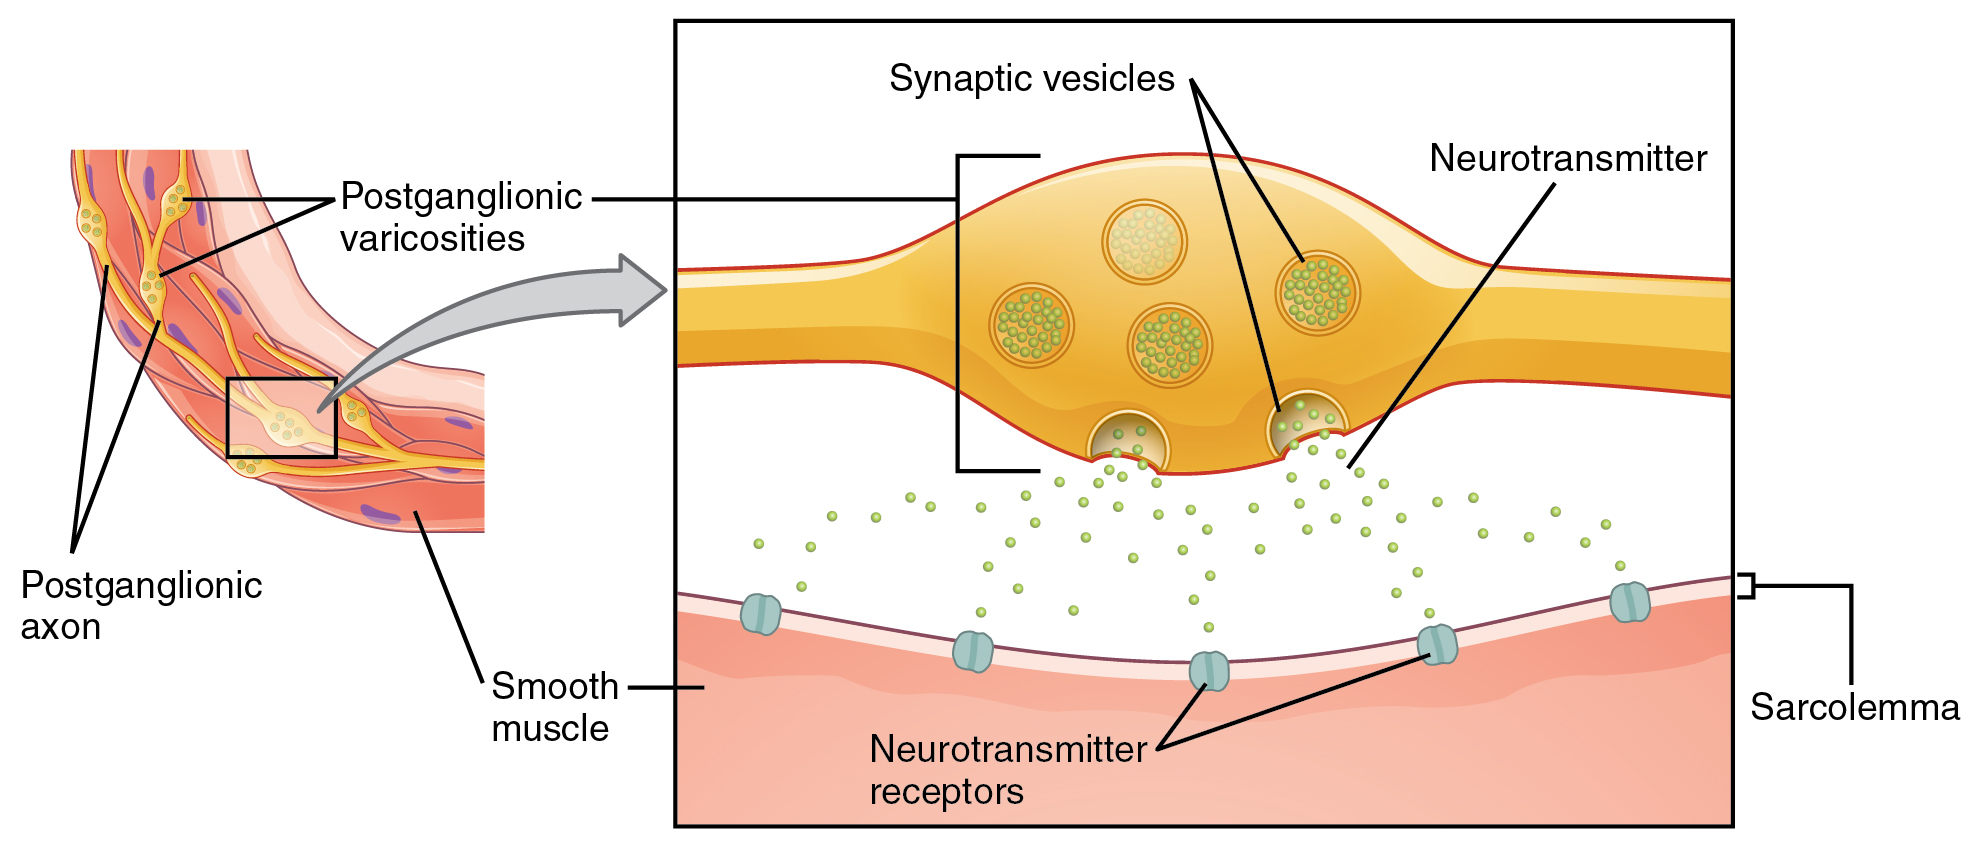 This figure shows the connection between autonomic fibers and the target effectors. The left image shows a slice of smooth muscle with the postganglionic varicosities and the postganglionic axons labeled. The right panel shows a magnified view of the synaptic vesicles, neurotransmitters, and the sarcolemma.